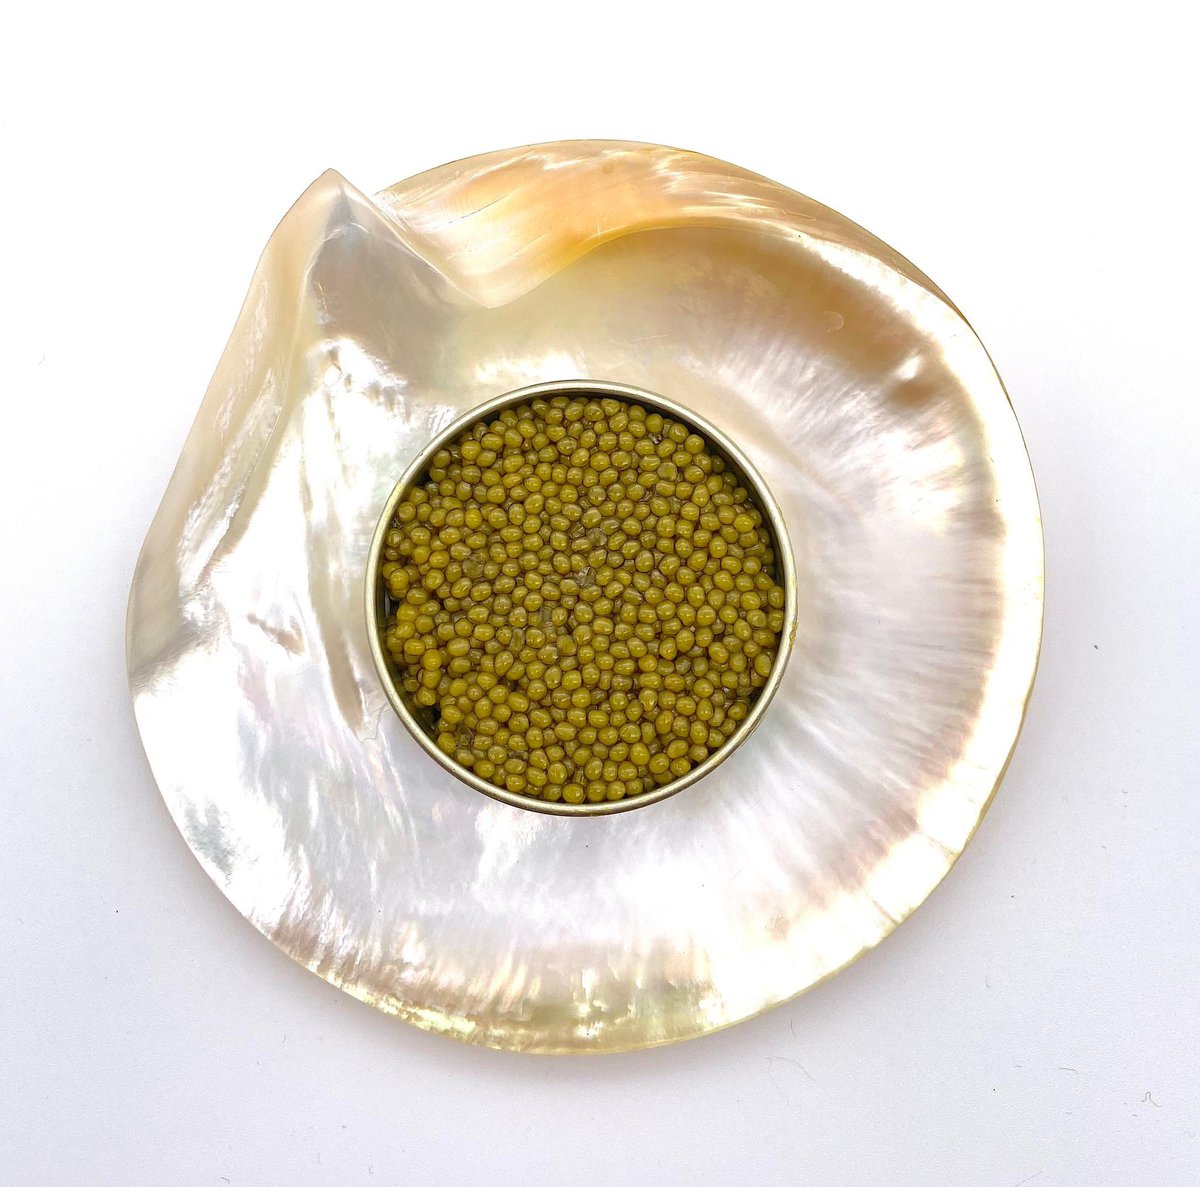 Looking for something special? try our Almas Diamond Caviar the rarest of the golden caviars.

kingsfinefood.co.uk/kings-category…

#almas #caviar #almasdiamond #almasdiamondcaviar #eggs #golden #sturgeon #kingsfinefood #buyonline #deliveryavailable #finefood #luxury #colour